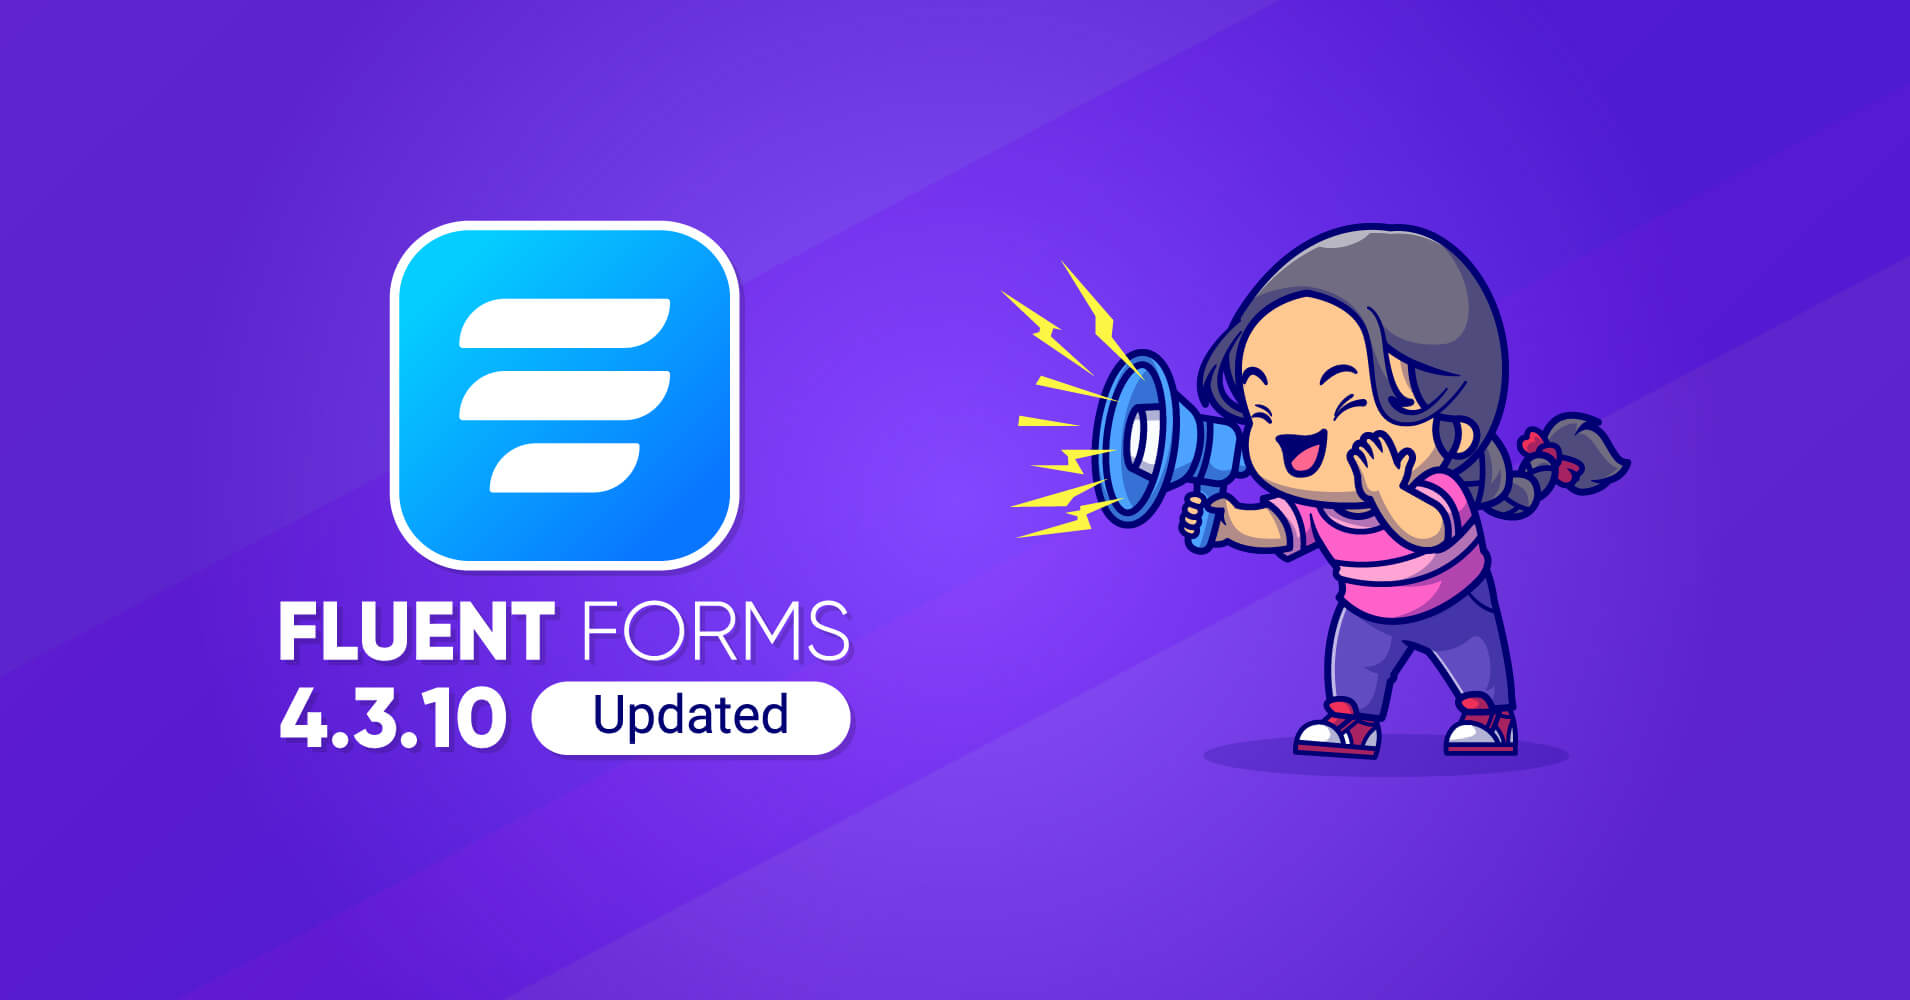 Fluent Forms update 4.3.10 release note